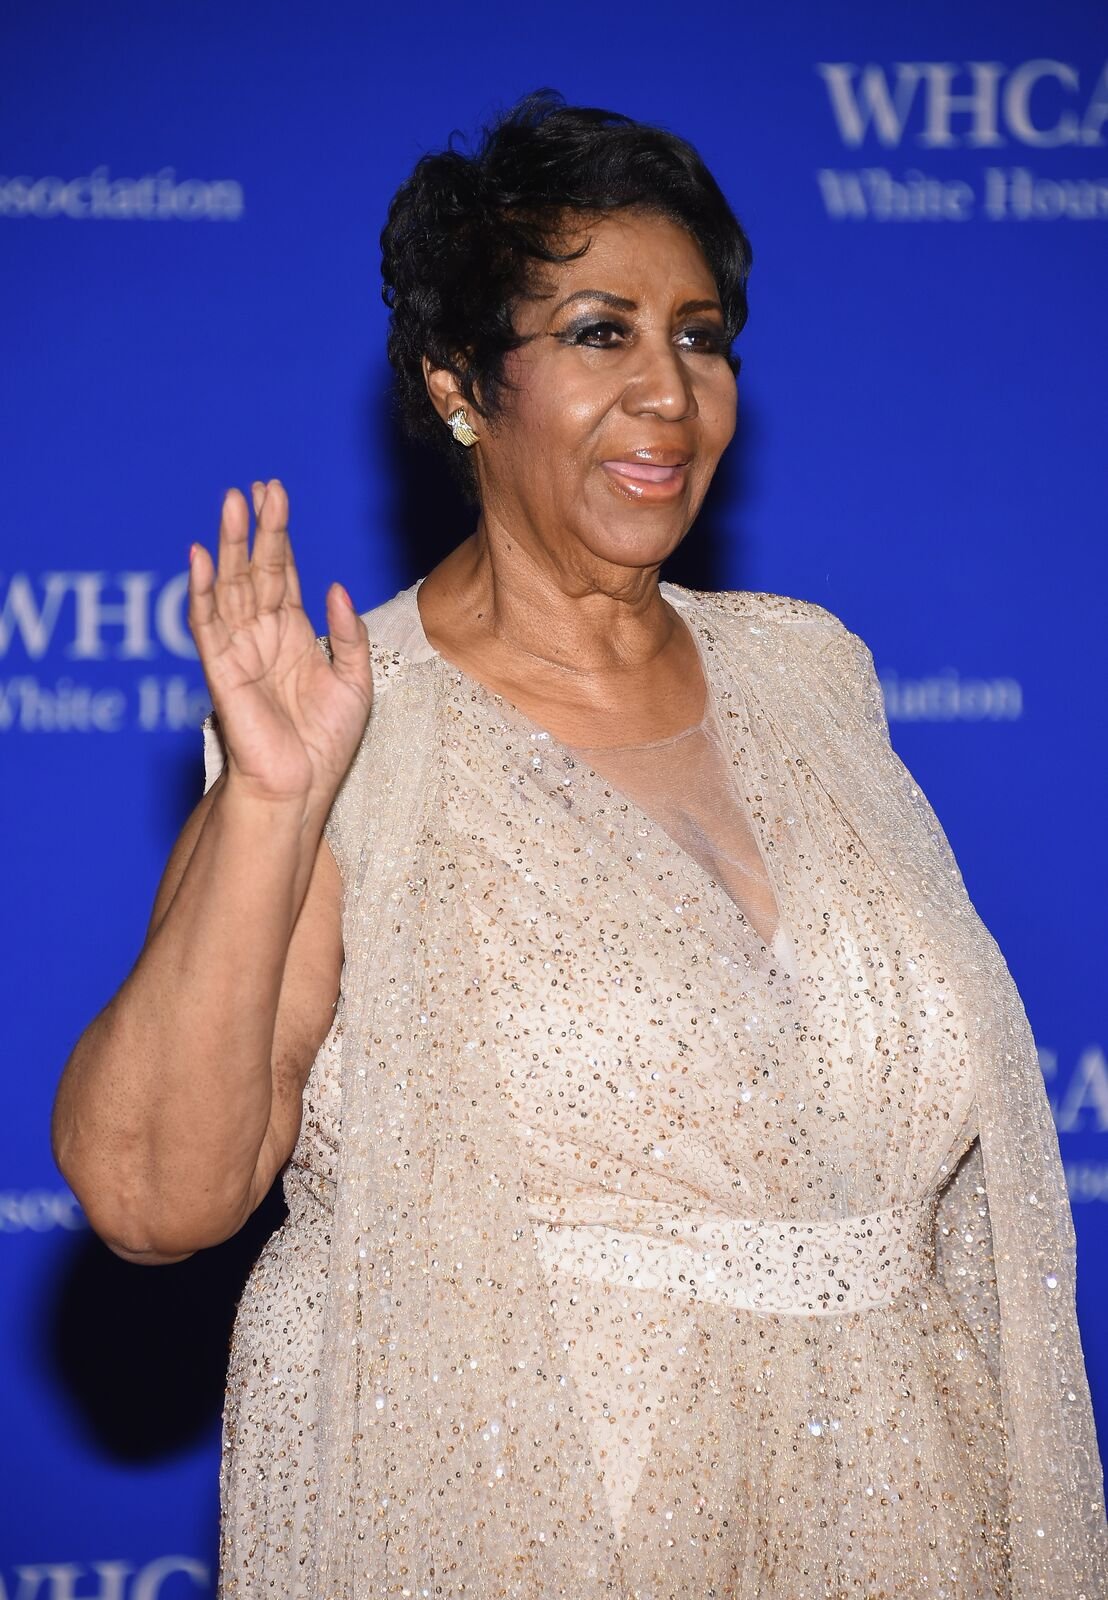 Singer Aretha Franklin attends the 102nd White House Correspondents' Association Dinner on April 30, 2016 in Washington, DC. | Photo: Getty Images